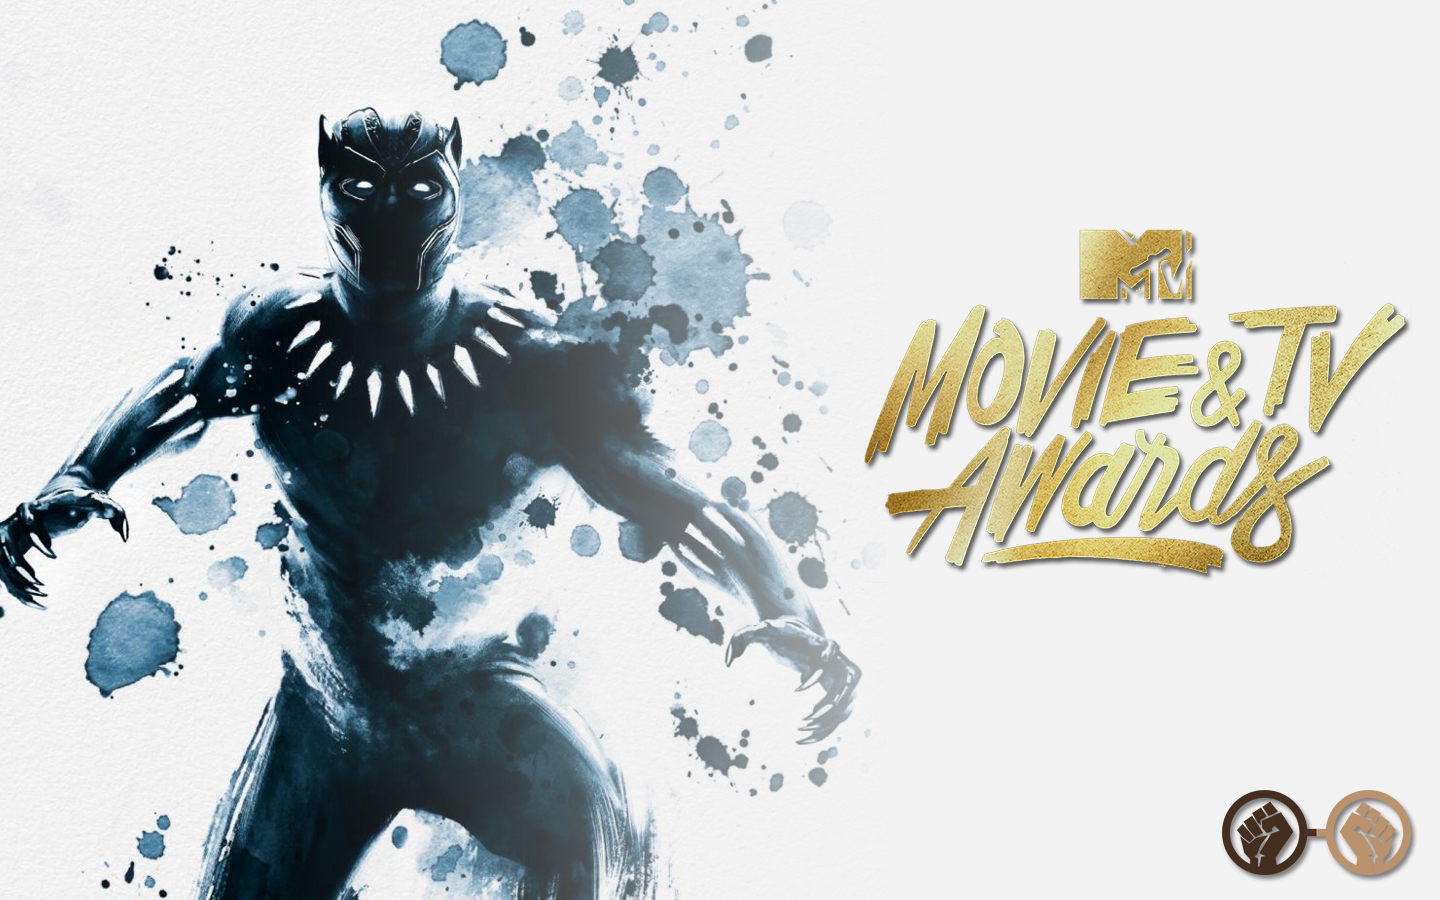 ‘Black Panther’ Leads Nominations For MTV Movie & TV Awards Hosted By Tiffany Haddish